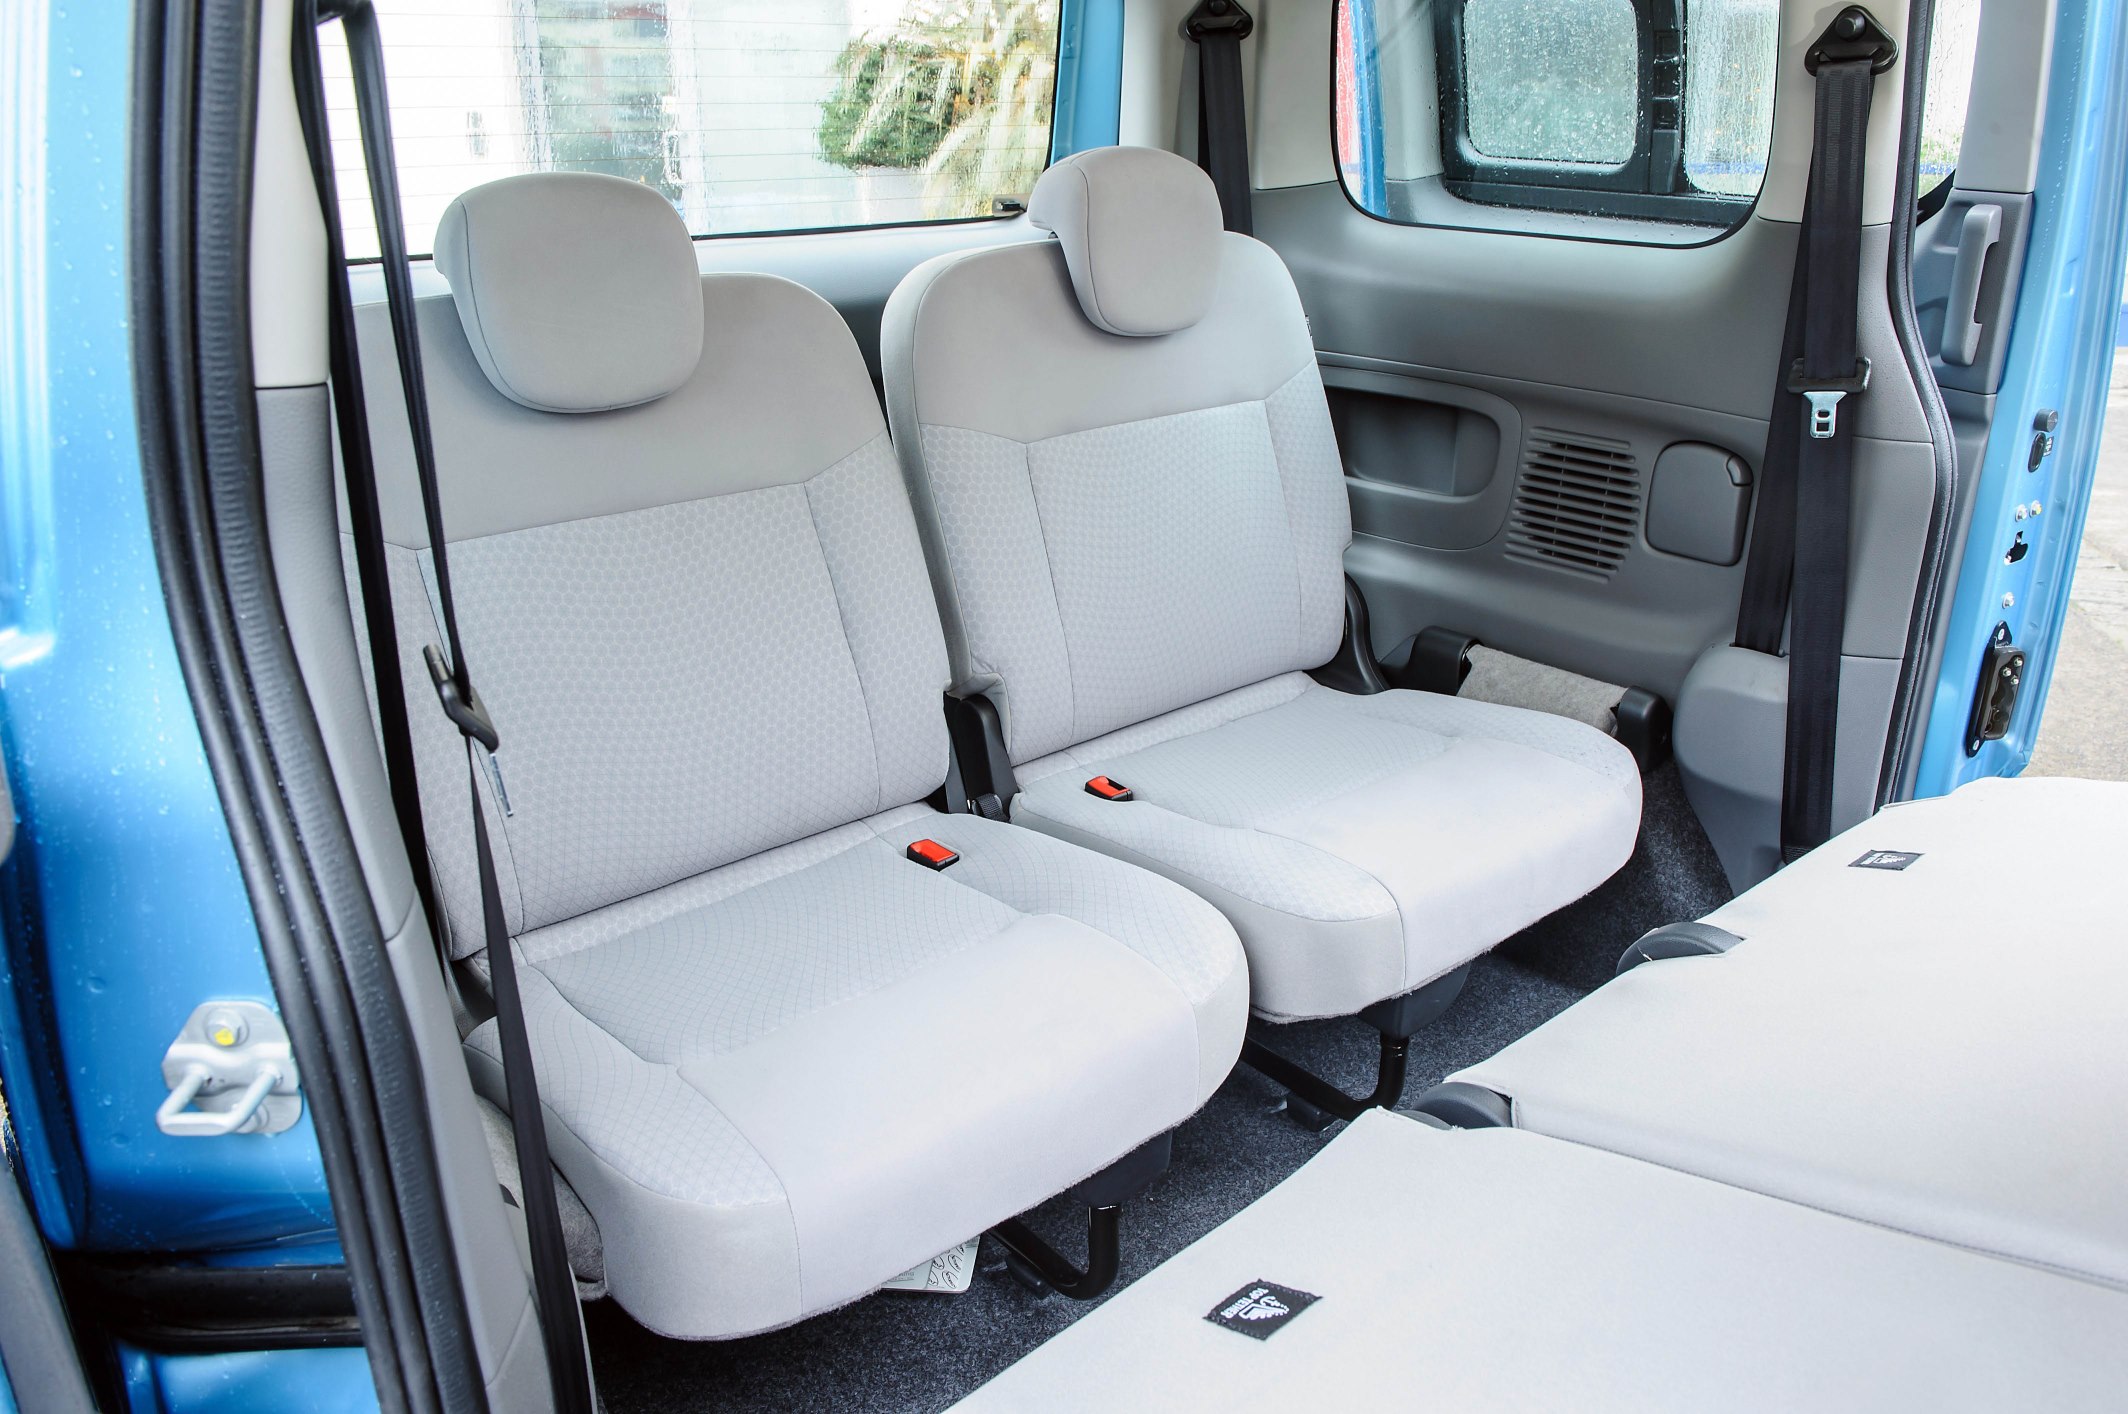 New Nissan e-NV200 Combi Offers